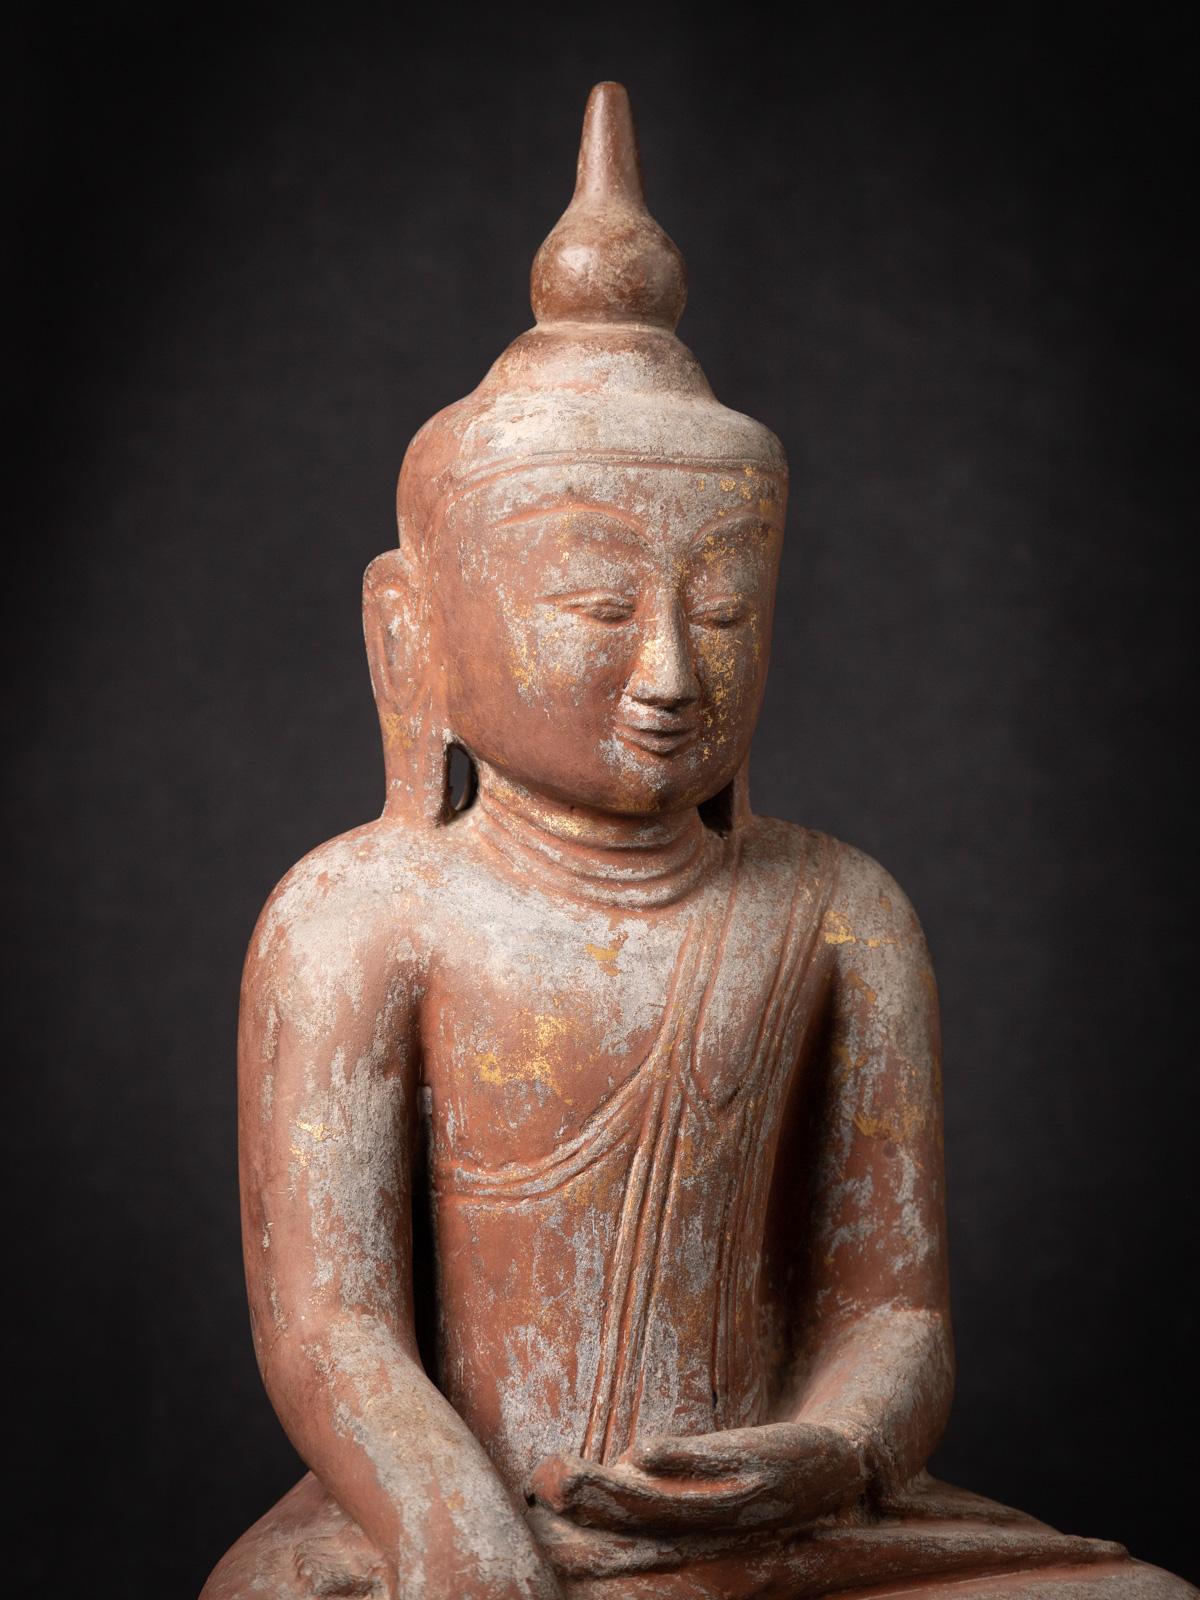 Exquisite 18th Century Burmese Sandstone Buddha Statue with Shan Tai Yai Style For Sale 3